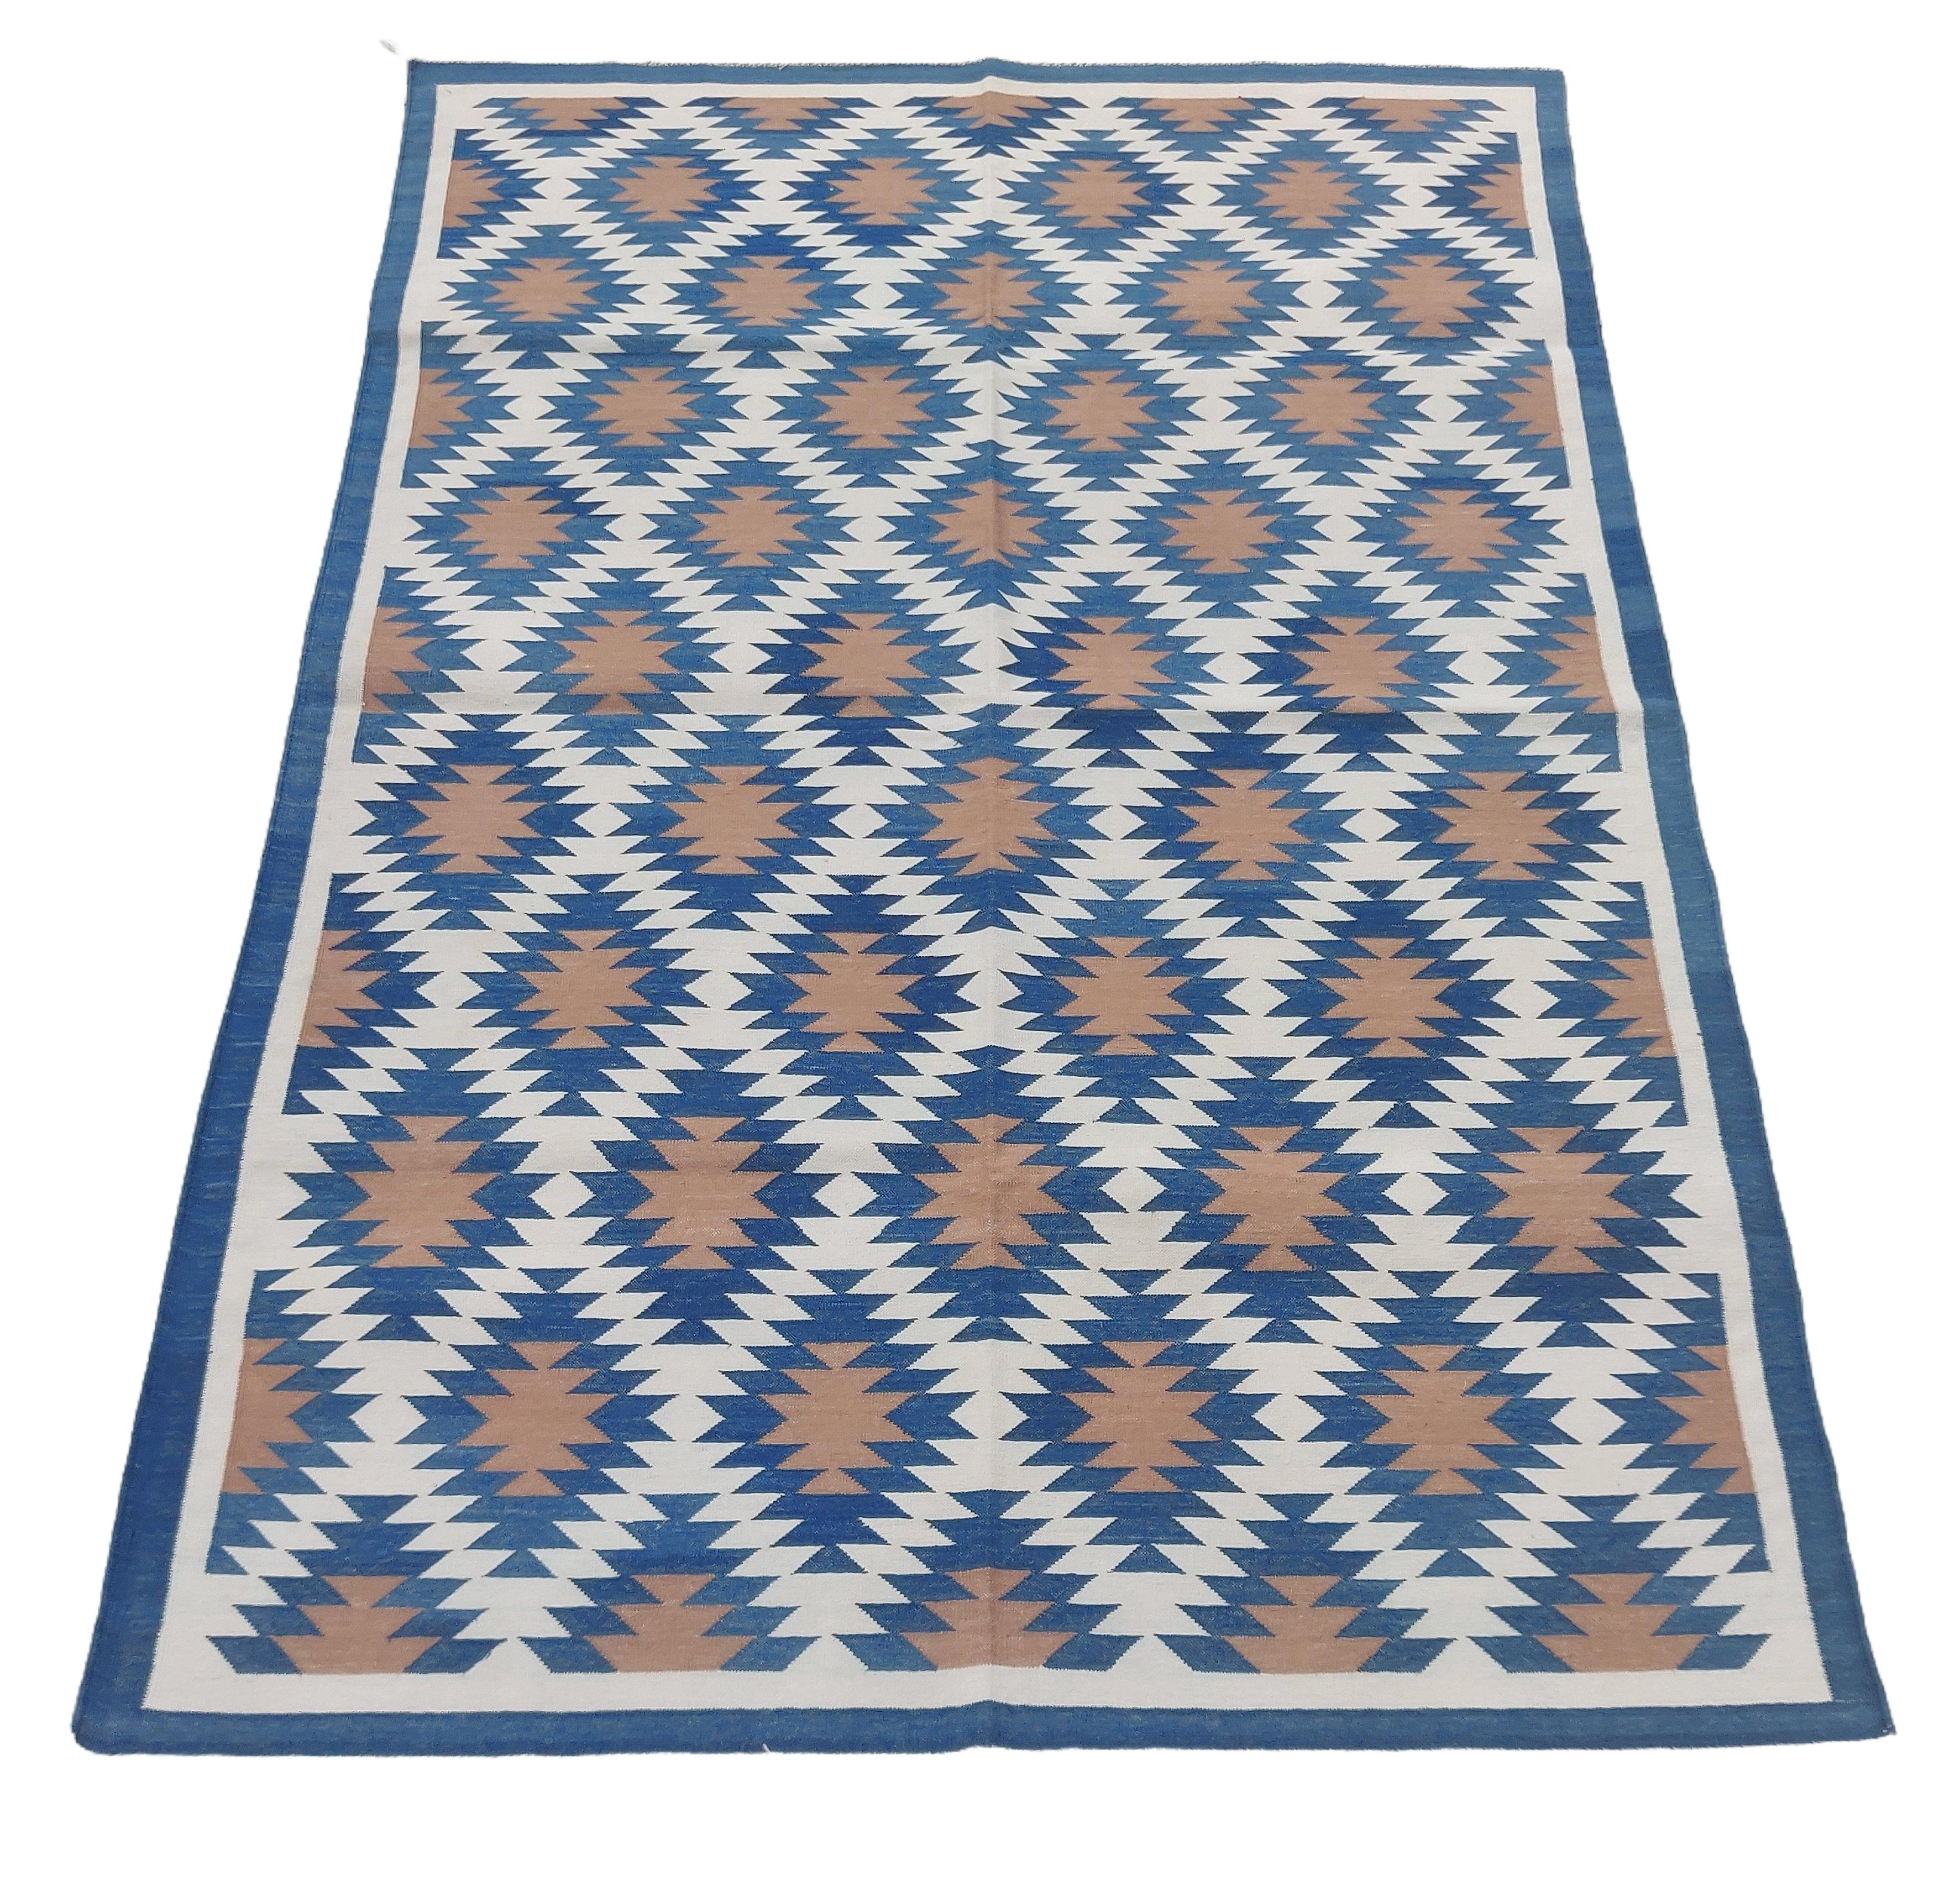 Cotton Vegetable Dyed Blue and White Geometric Indian Dhurrie Rug-4'x6' 

These special flat-weave dhurries are hand-woven with 15 ply 100% cotton yarn. Due to the special manufacturing techniques used to create our rugs, the size and color of each